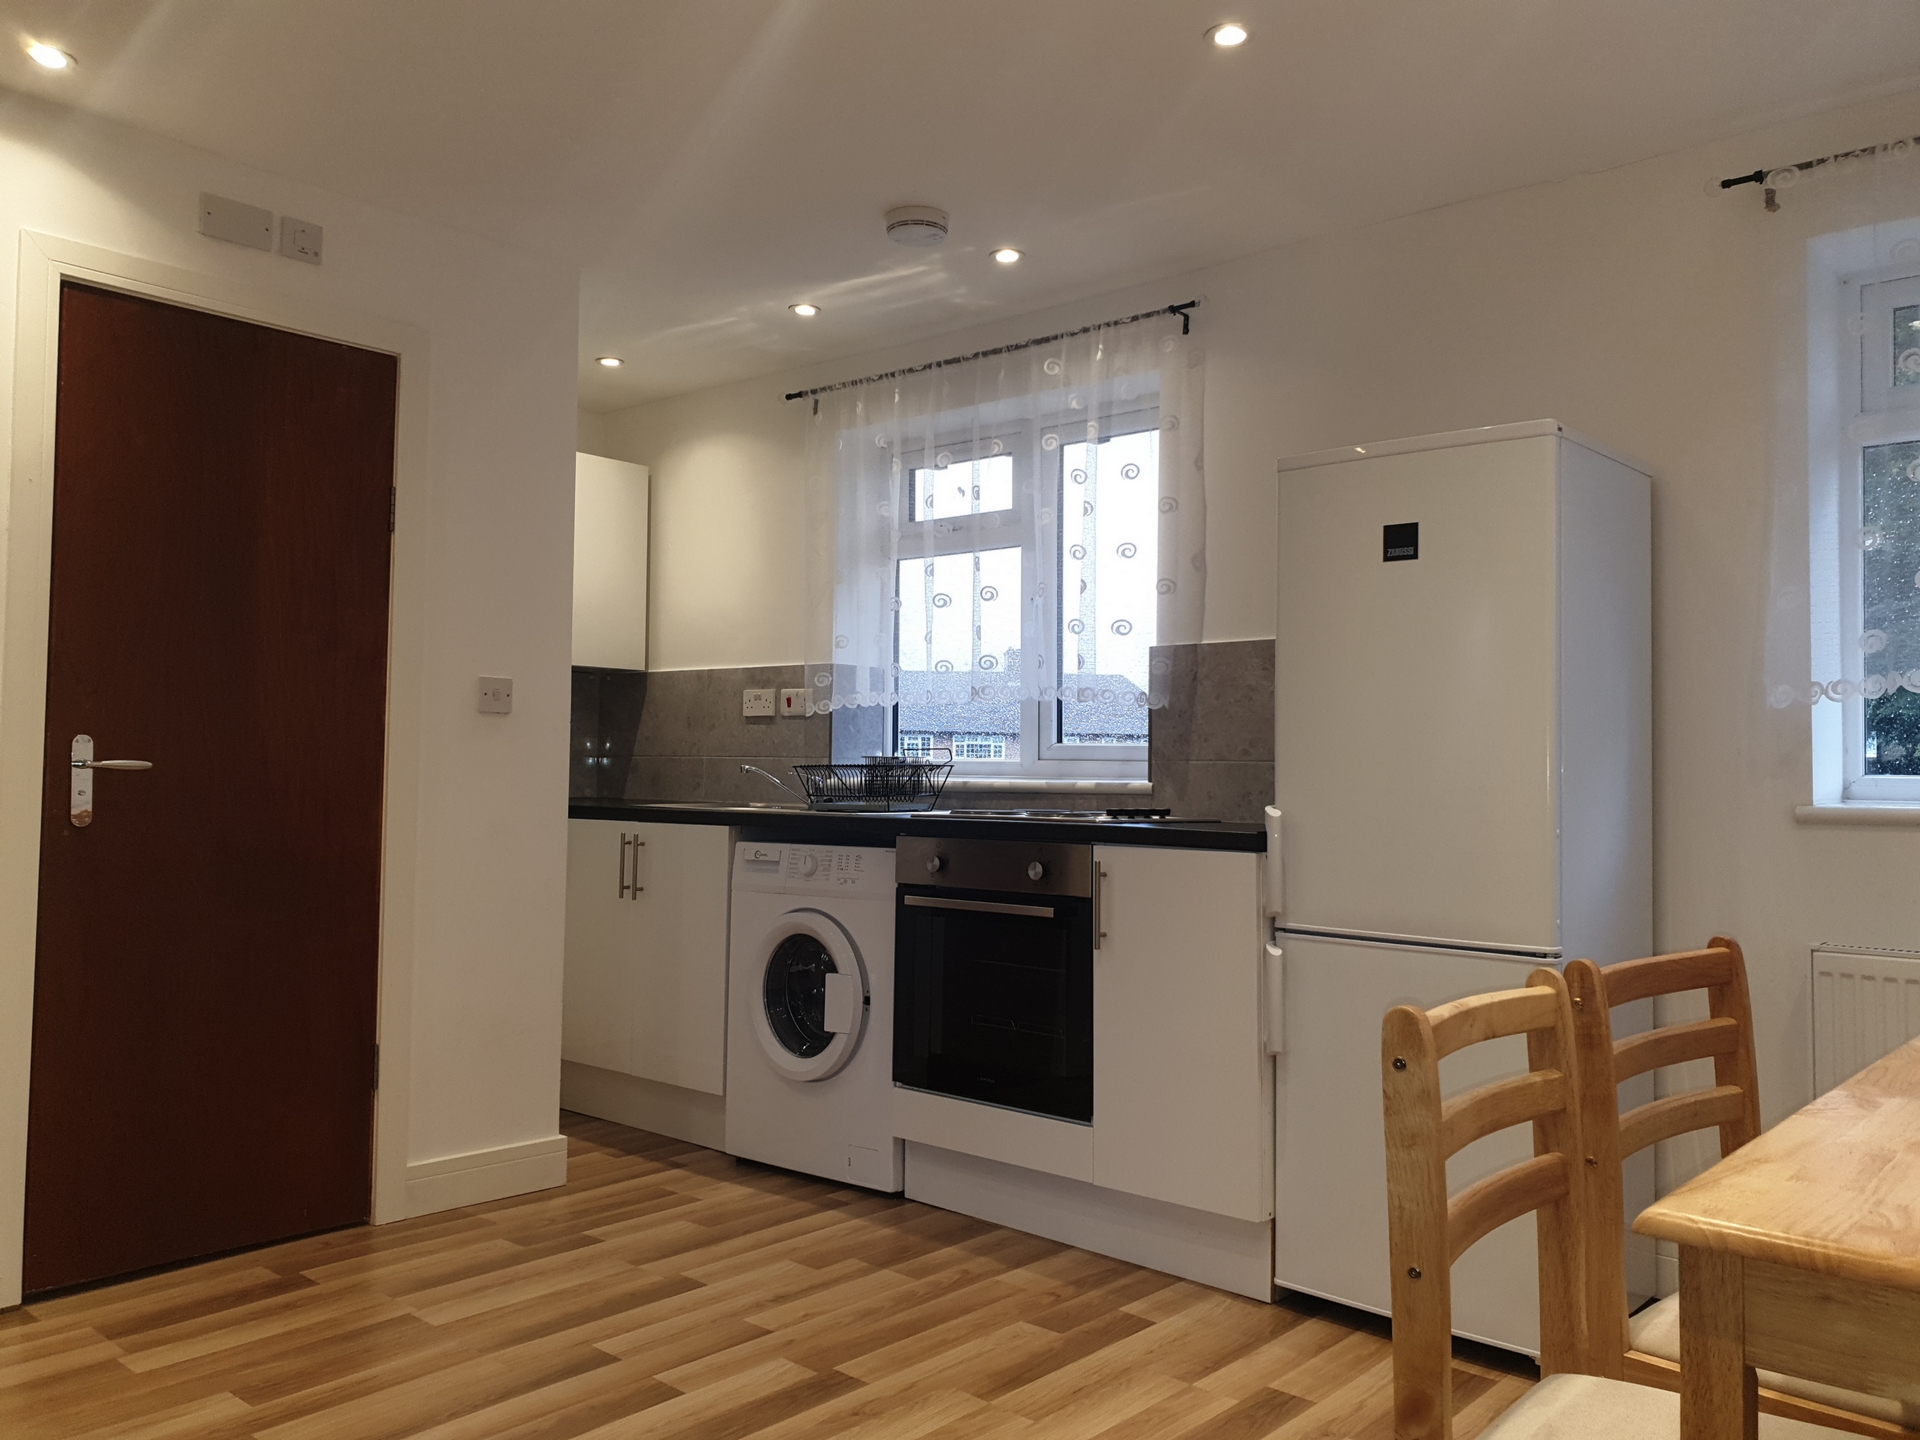 2 Bedroom Flat to rent in , London, W12